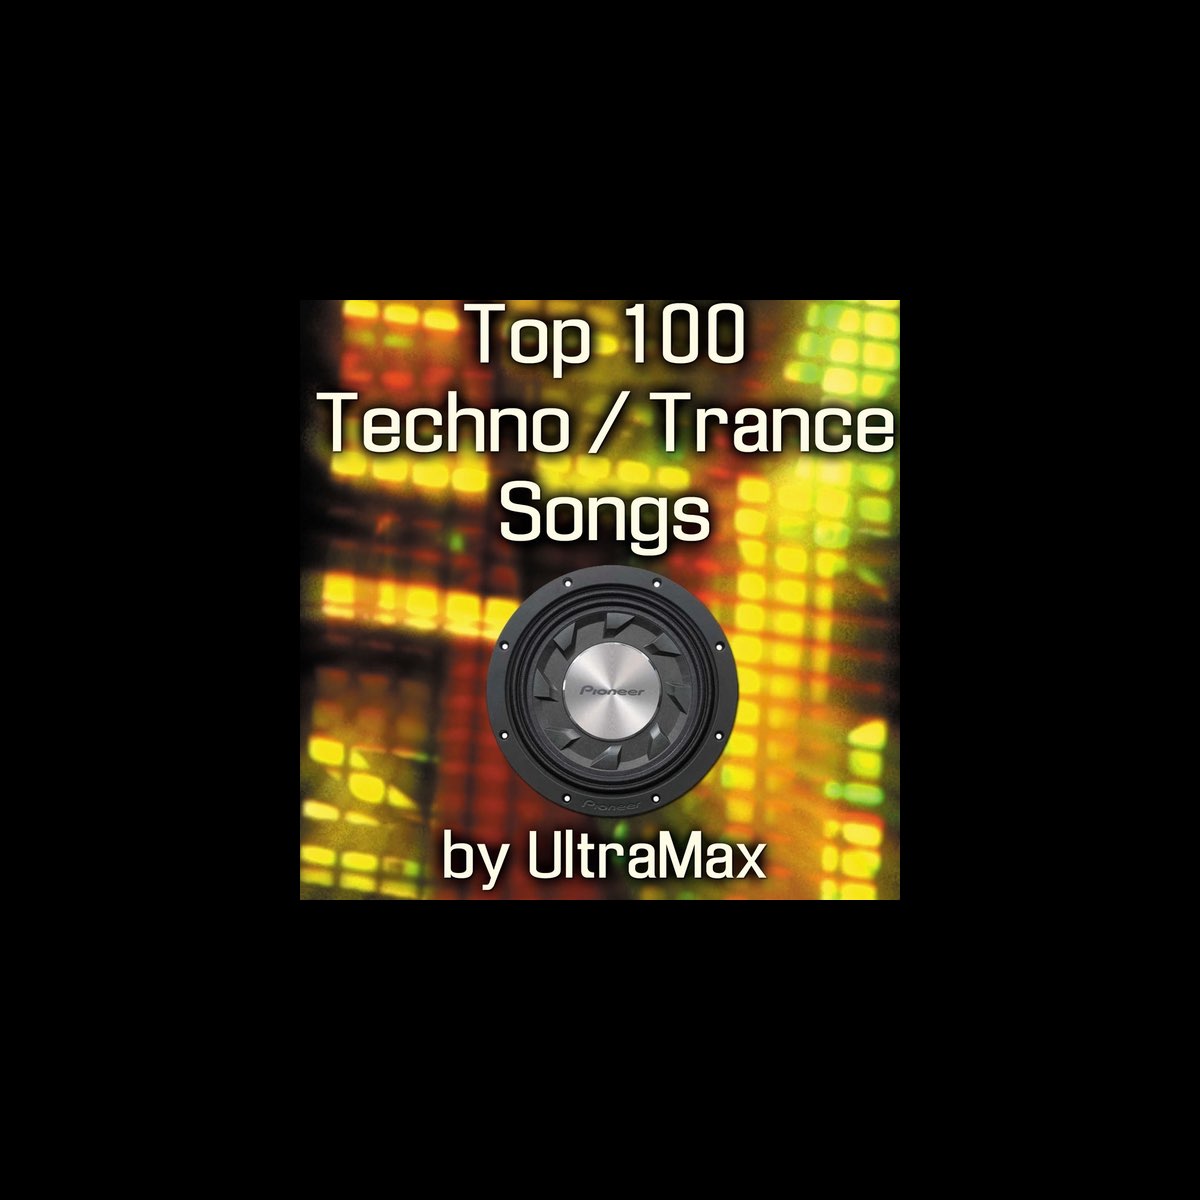 100 Top Techno / Trance Songs (MP3 Data Disc) by UltraMax on Apple Music